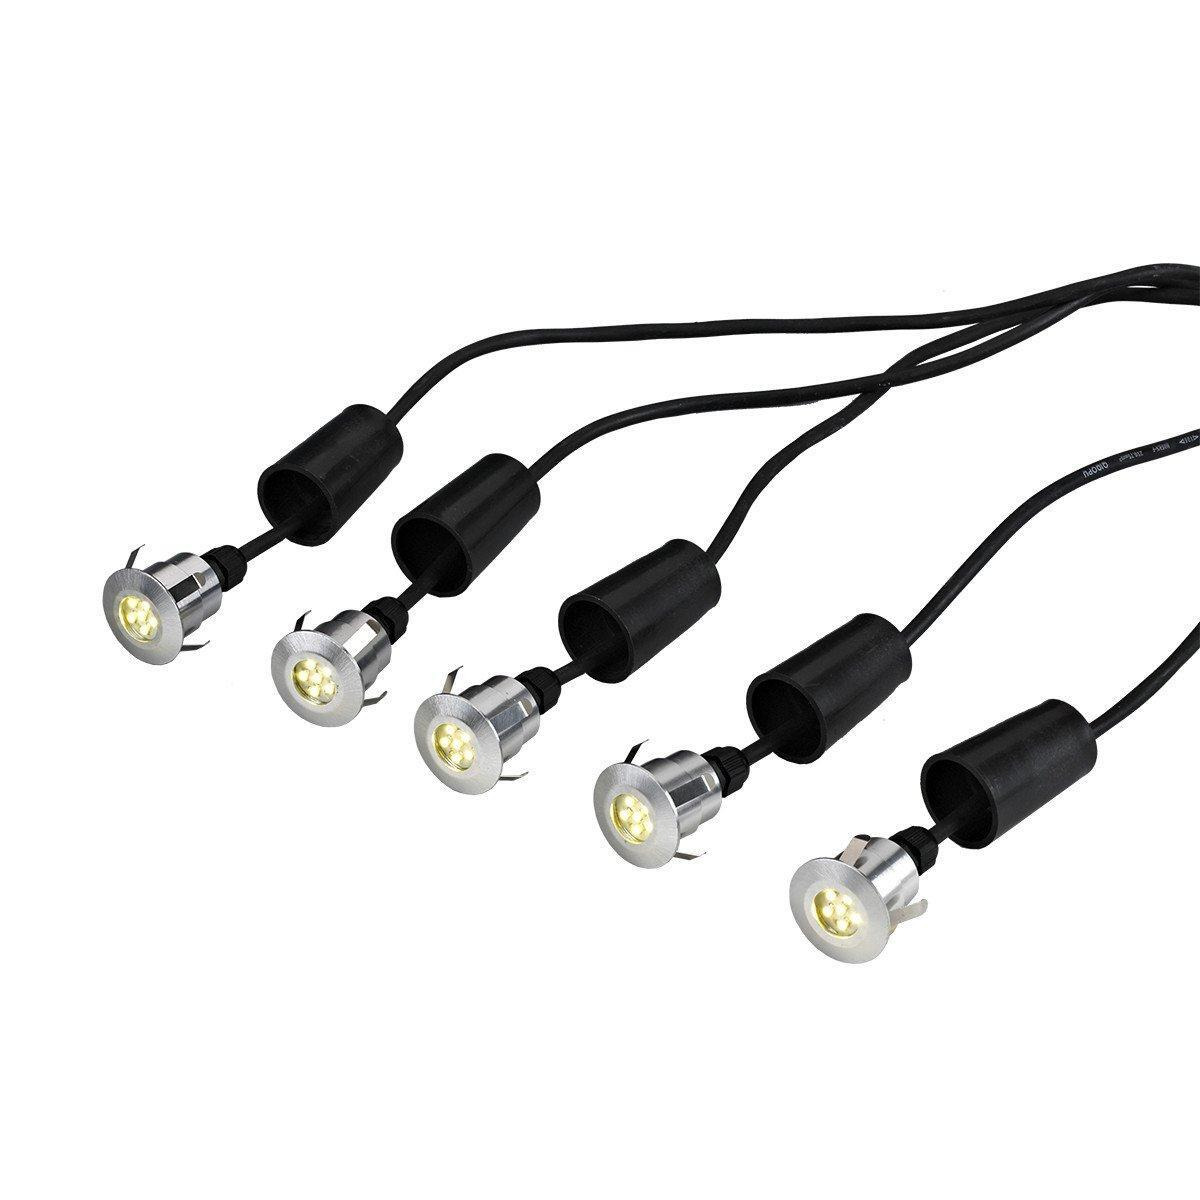 Derwent 5 x Deck Garden light with 6m cable and 12V Transformer IP54 - image 1